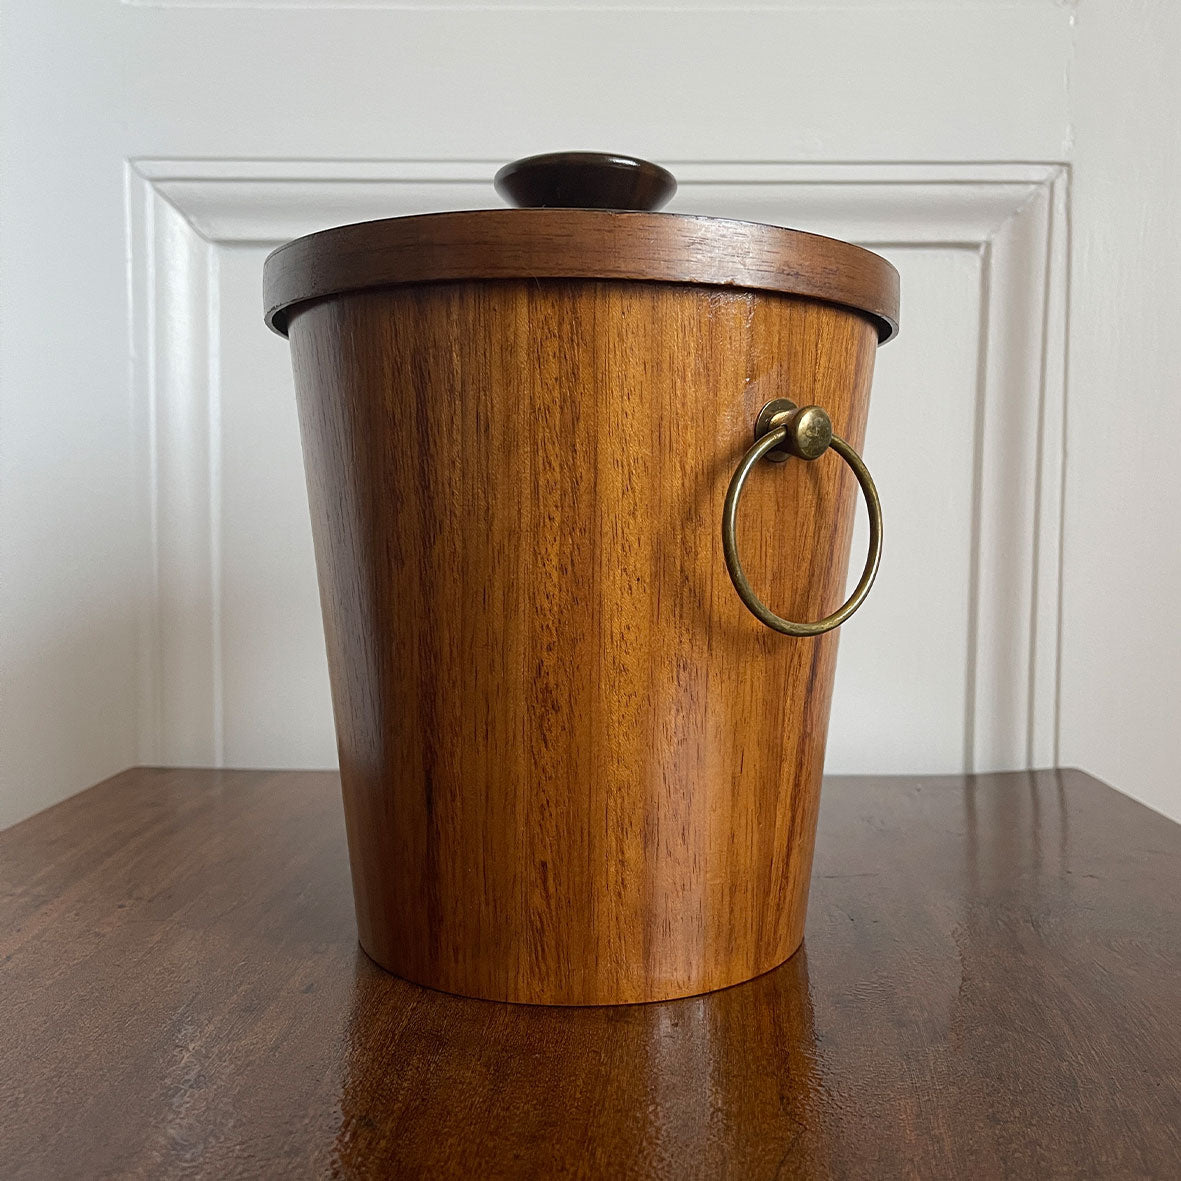 A very cool Vintage Scandinavian Teak Ice Bucket by KMC. Tapered to the base with two brass ring handles to the sides and a teak knob on the lid. Inside is aluminium lined to keep the ice nice and cold. Marked on the bottom with the horse logo - SHOP NOW - www.intovintage.co.uk